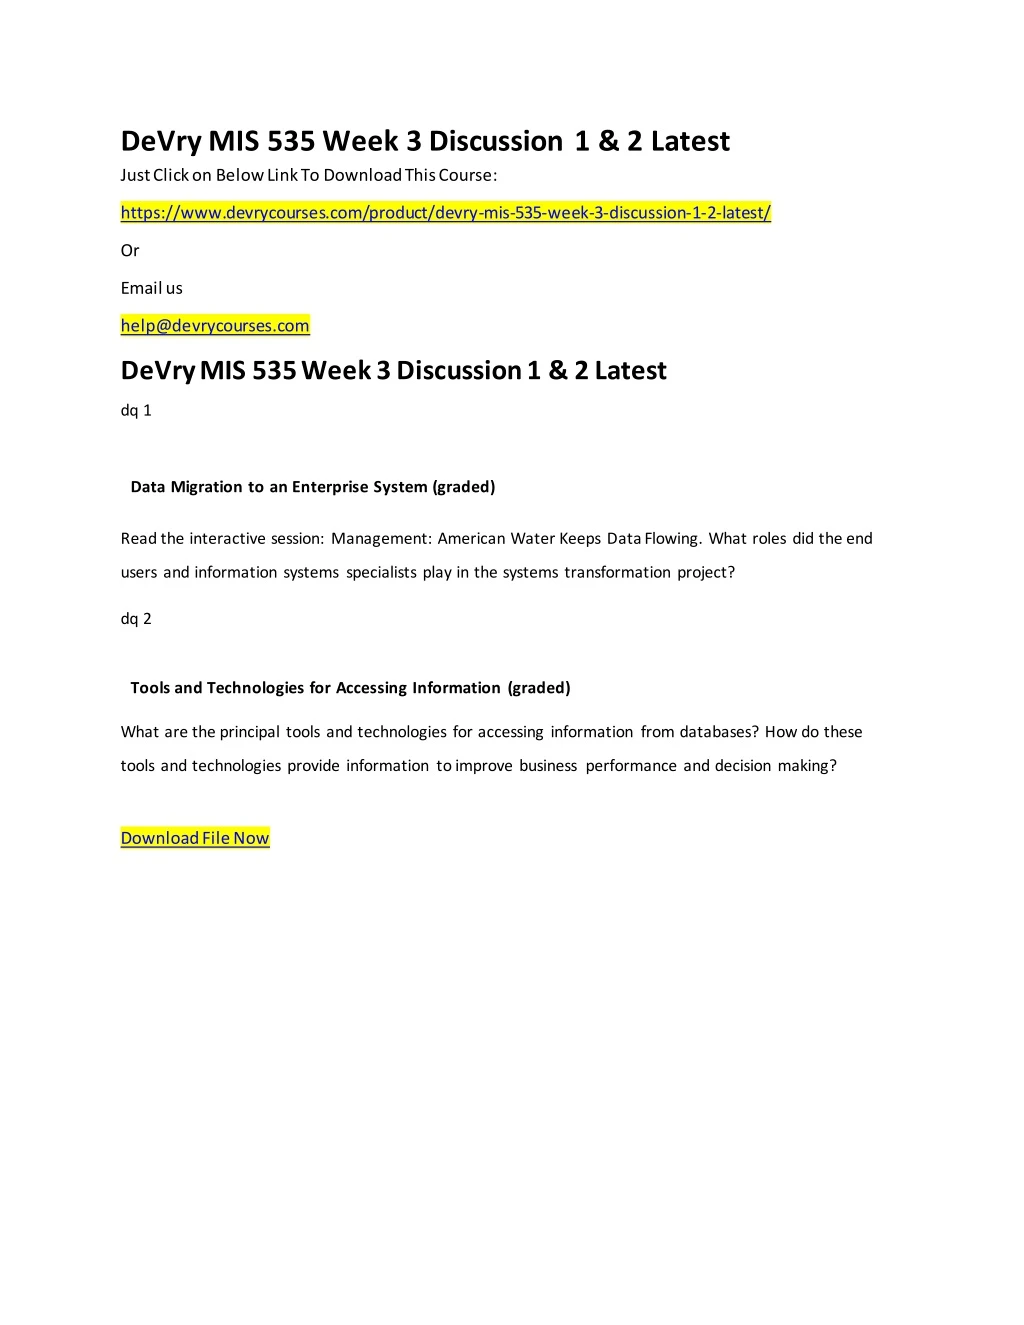 devry mis 535 week 3 discussion 1 2 latest just